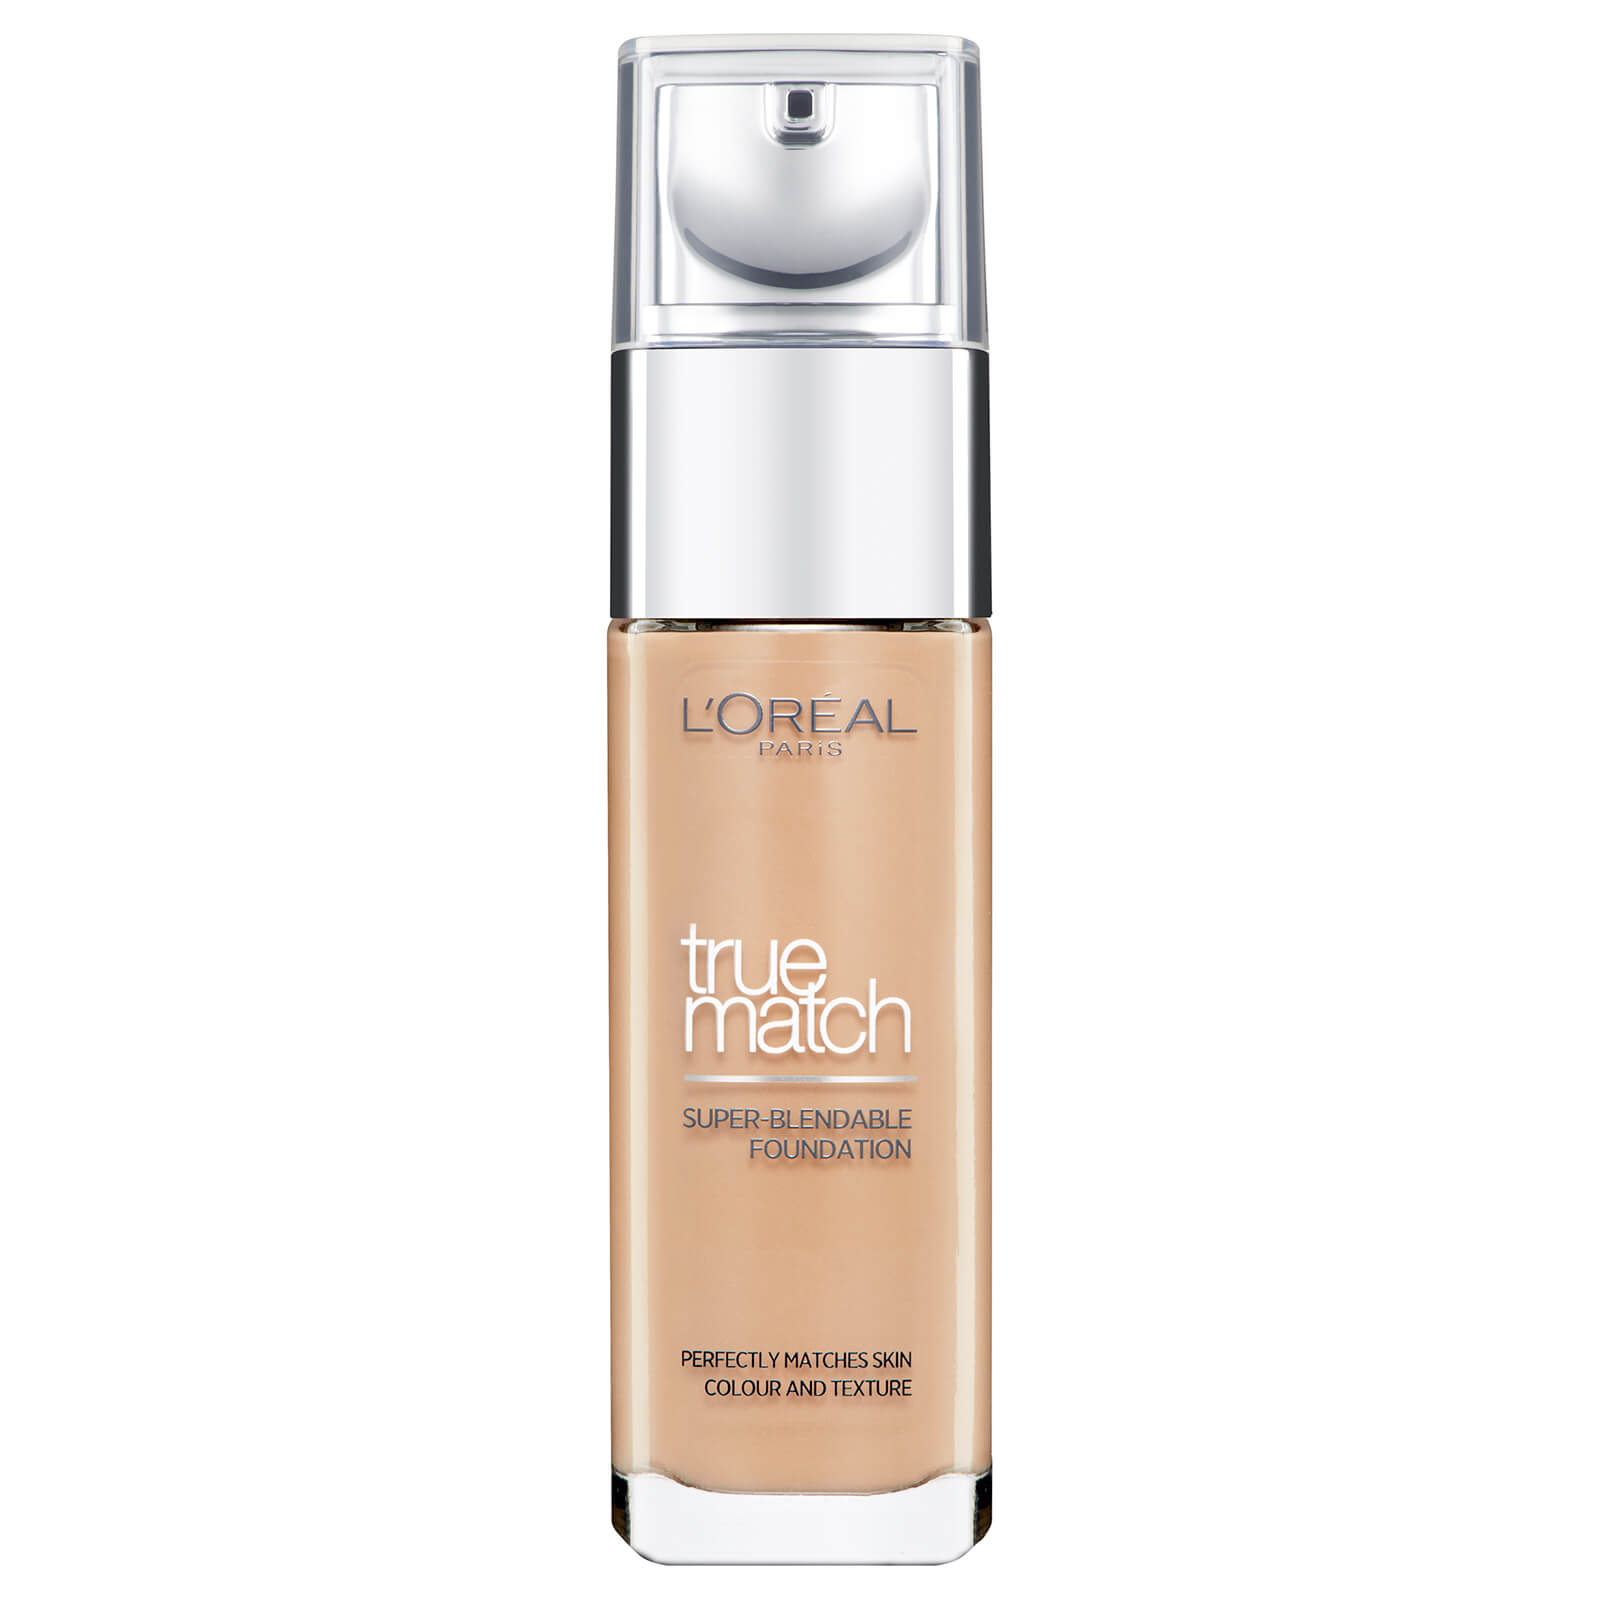 L'Oréal Paris True Match Liquid Foundation with SPF and Hyaluronic Acid 30ml (Various Shades) - 6.5W Golden Toffee